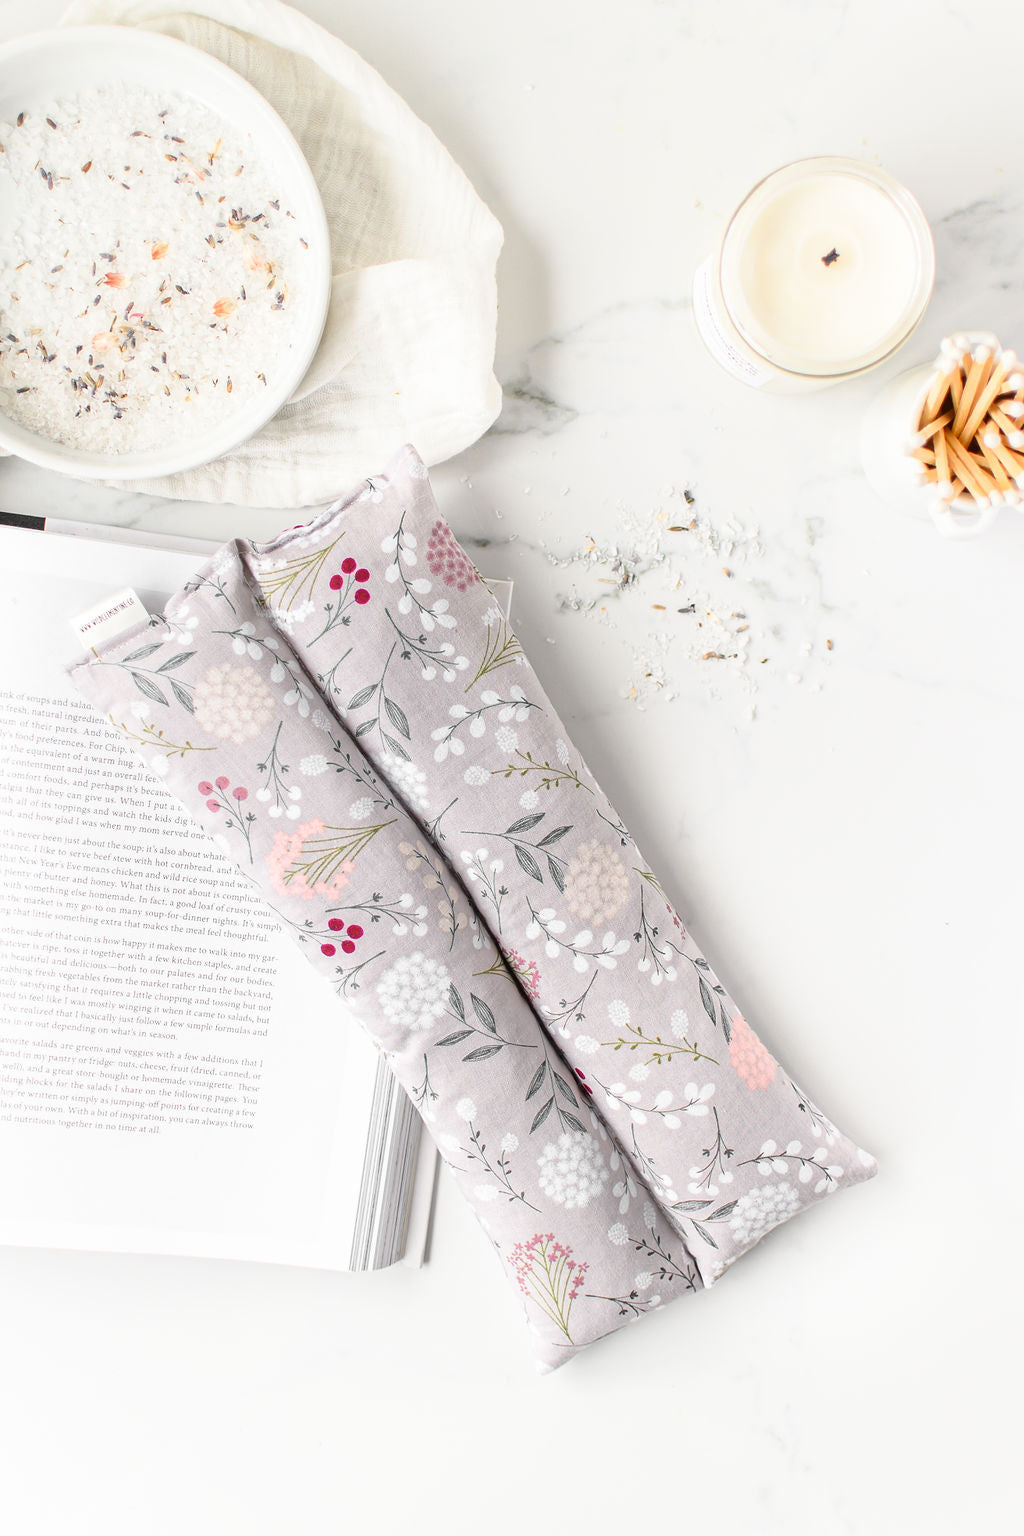 Hot + Cold Therapy Pack - Grey Floral